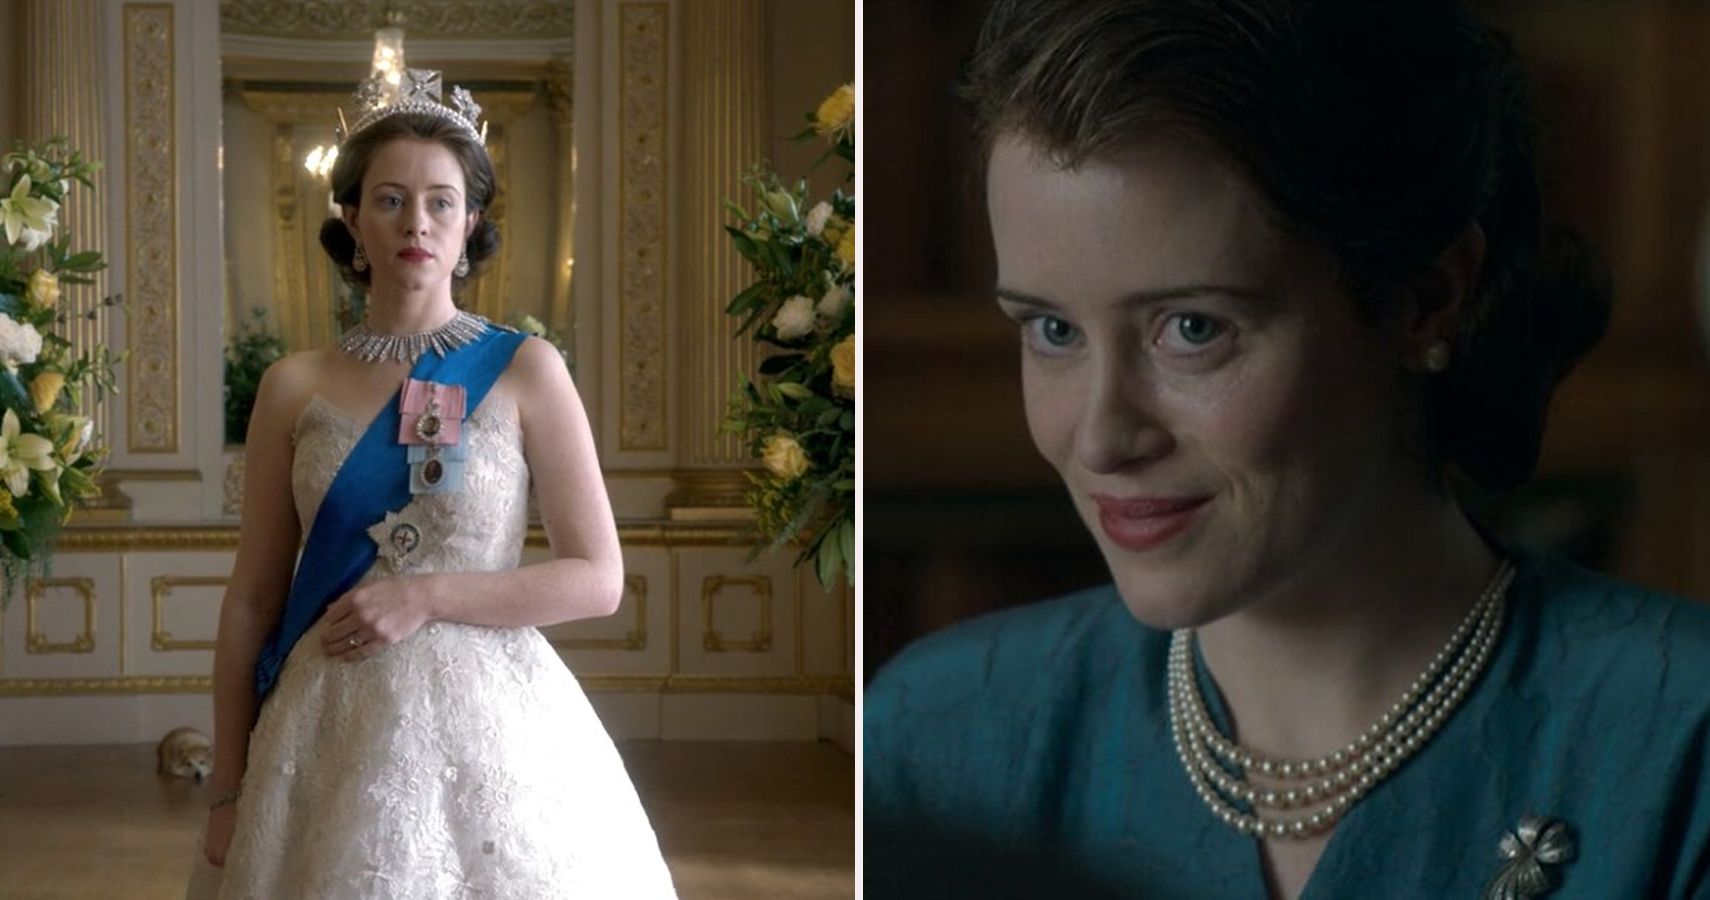 The Crown The 10 BestRanked Episodes According To IMDb